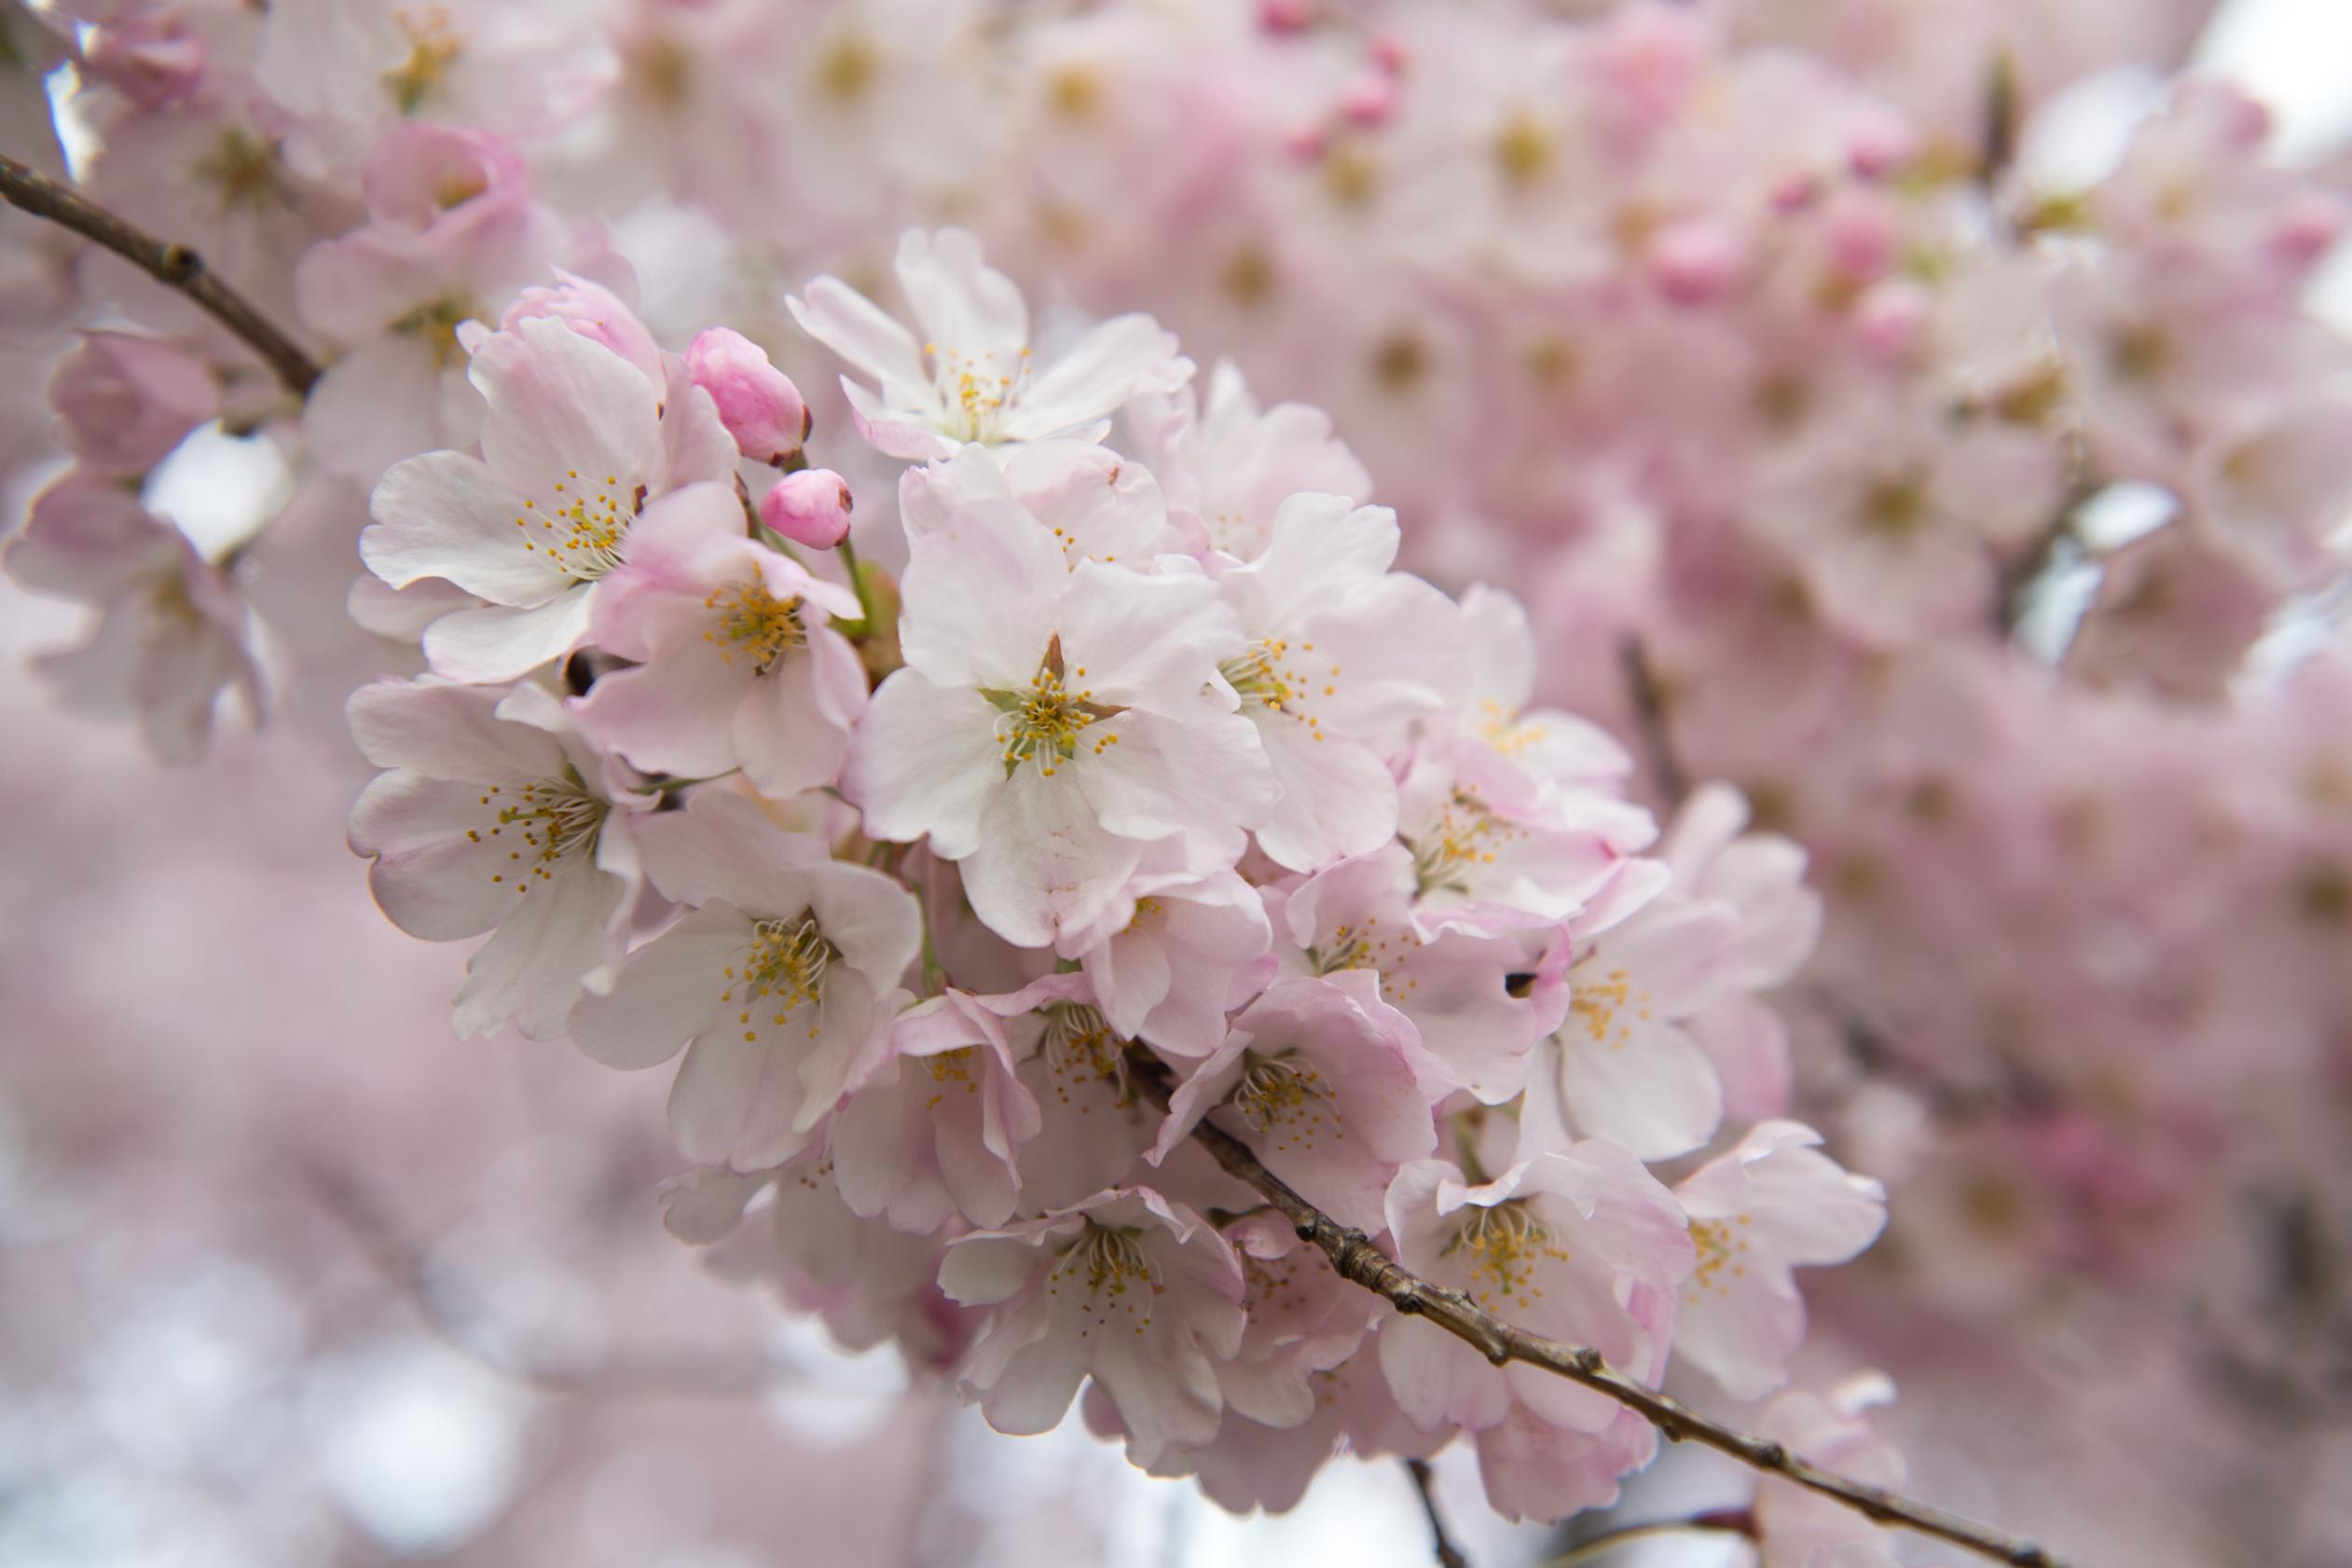 Cherry Blossoms In Washington To Reach 2019 Peak On April 1 Cnn Travel,How To Clean A Kitchen Faucet Spray Head